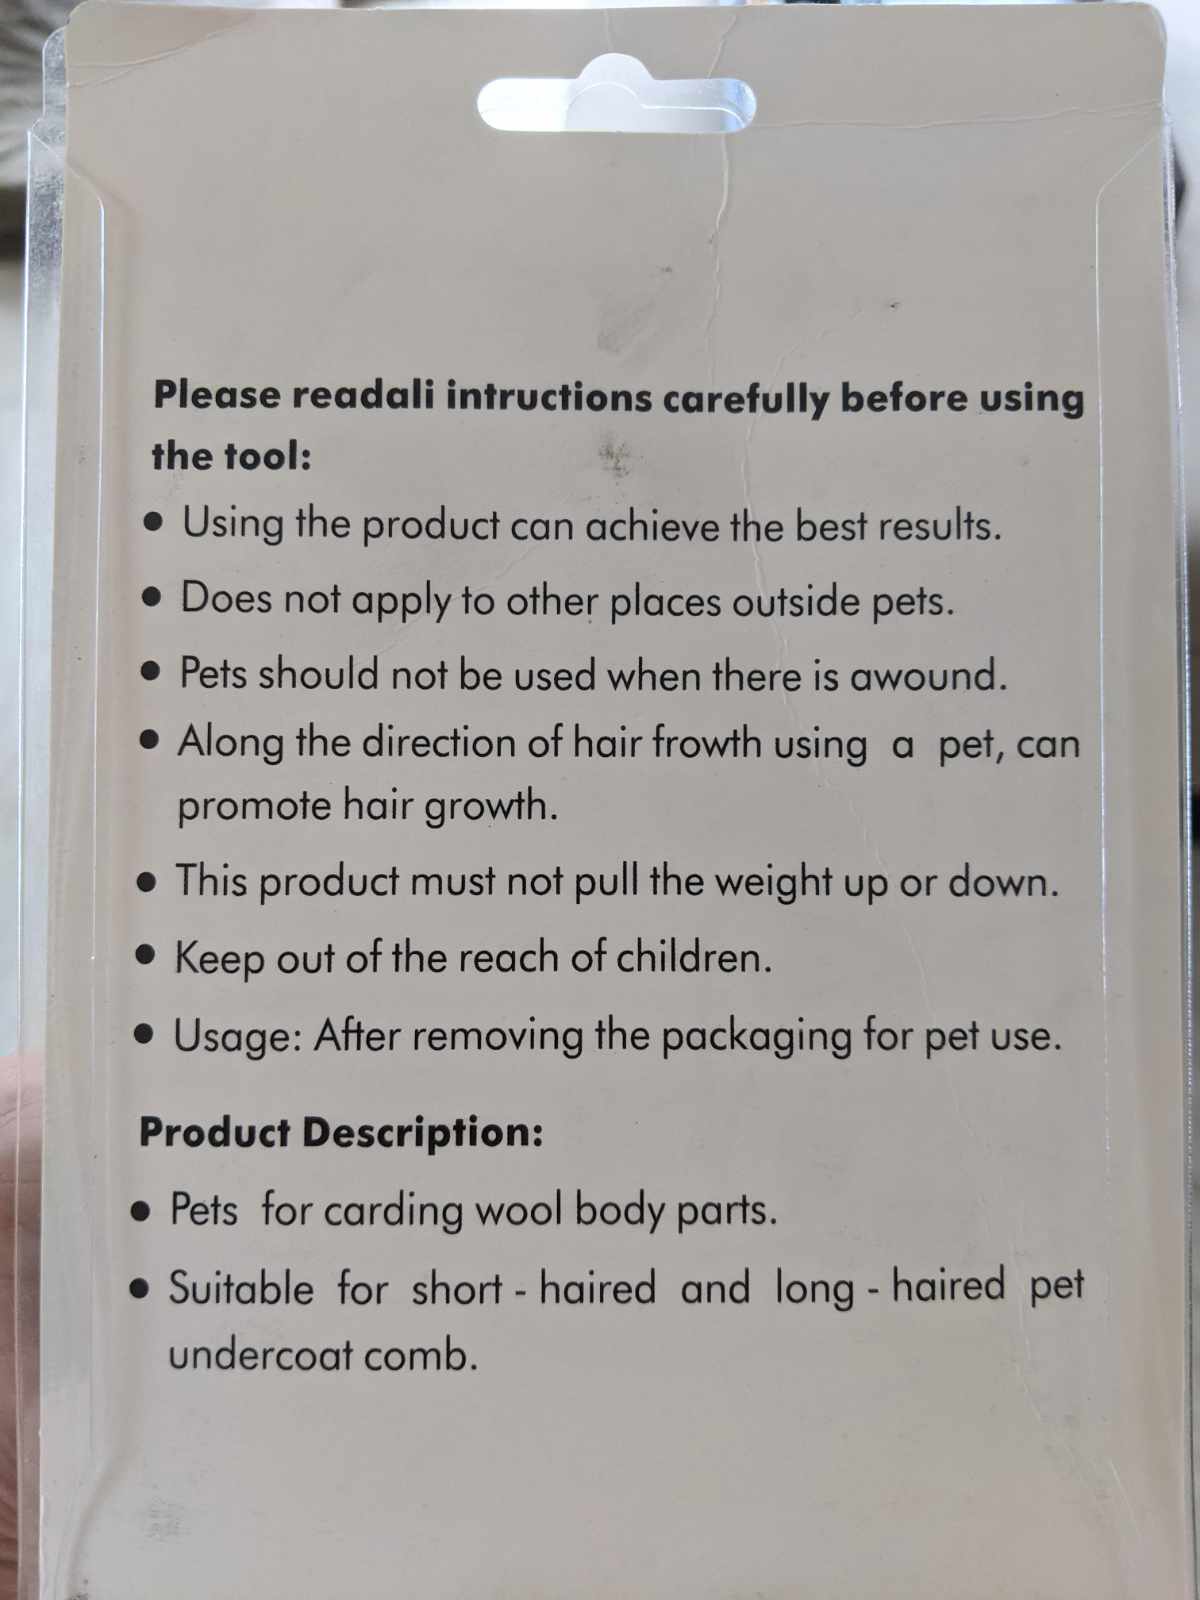 I bought a new cat brush. These were the instructions on the package